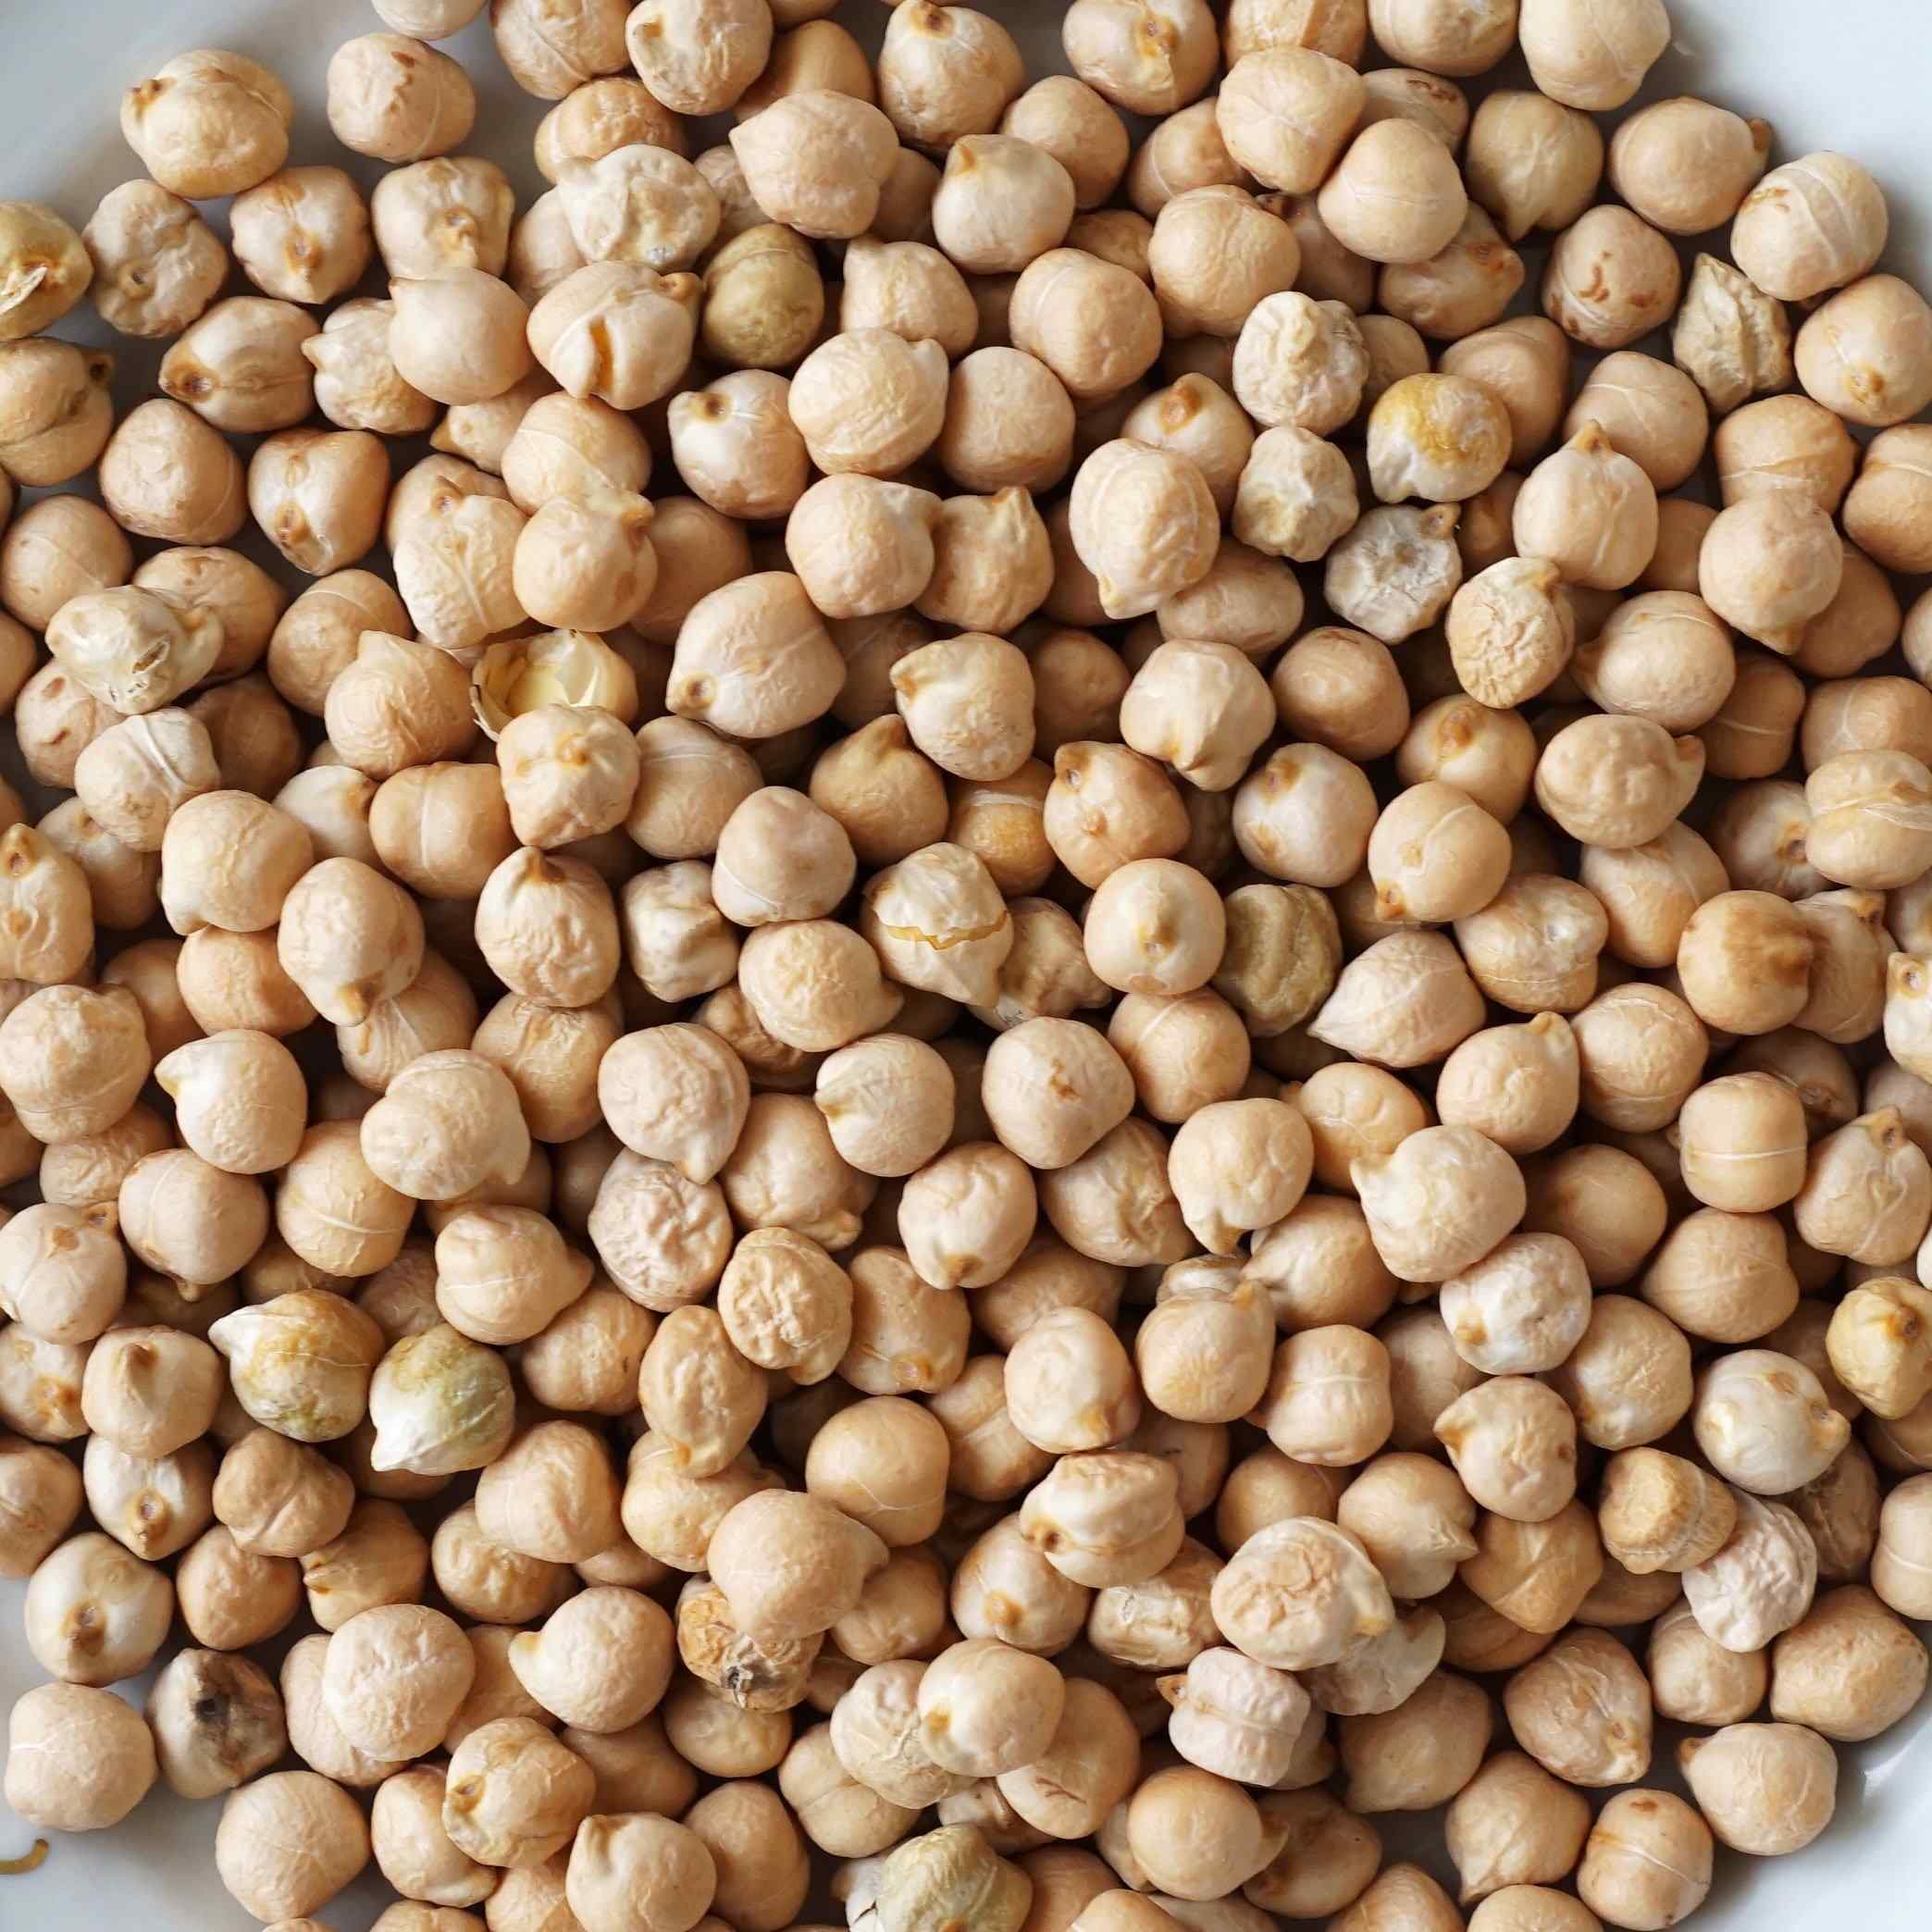 Chana: Health Benefits, Nutrition And Side Effects